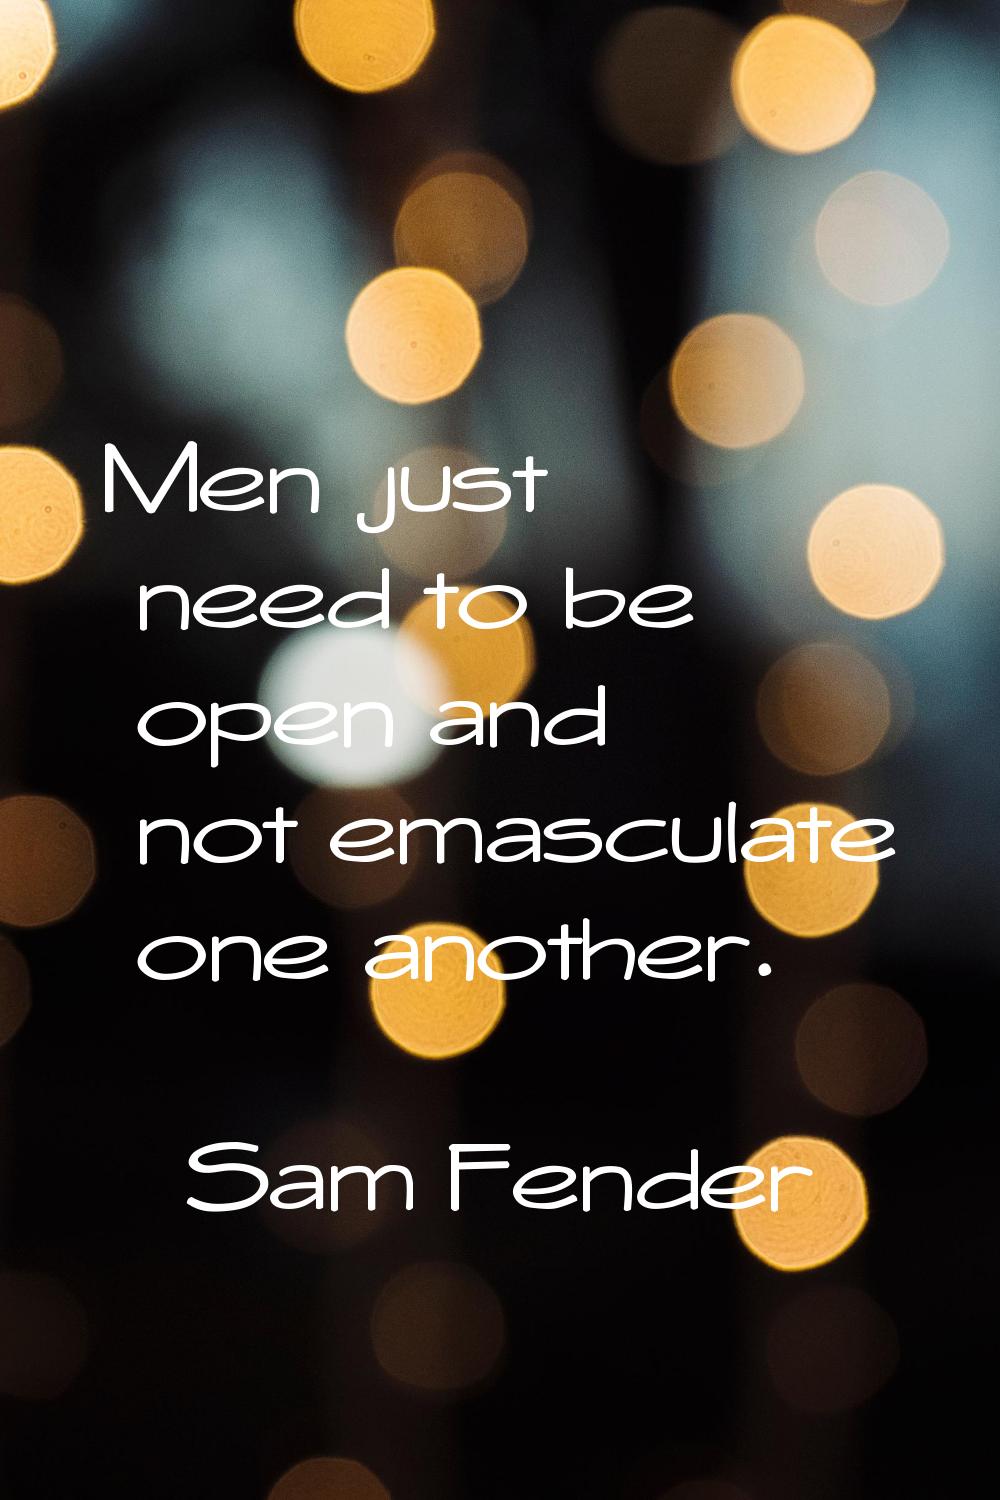 Men just need to be open and not emasculate one another.